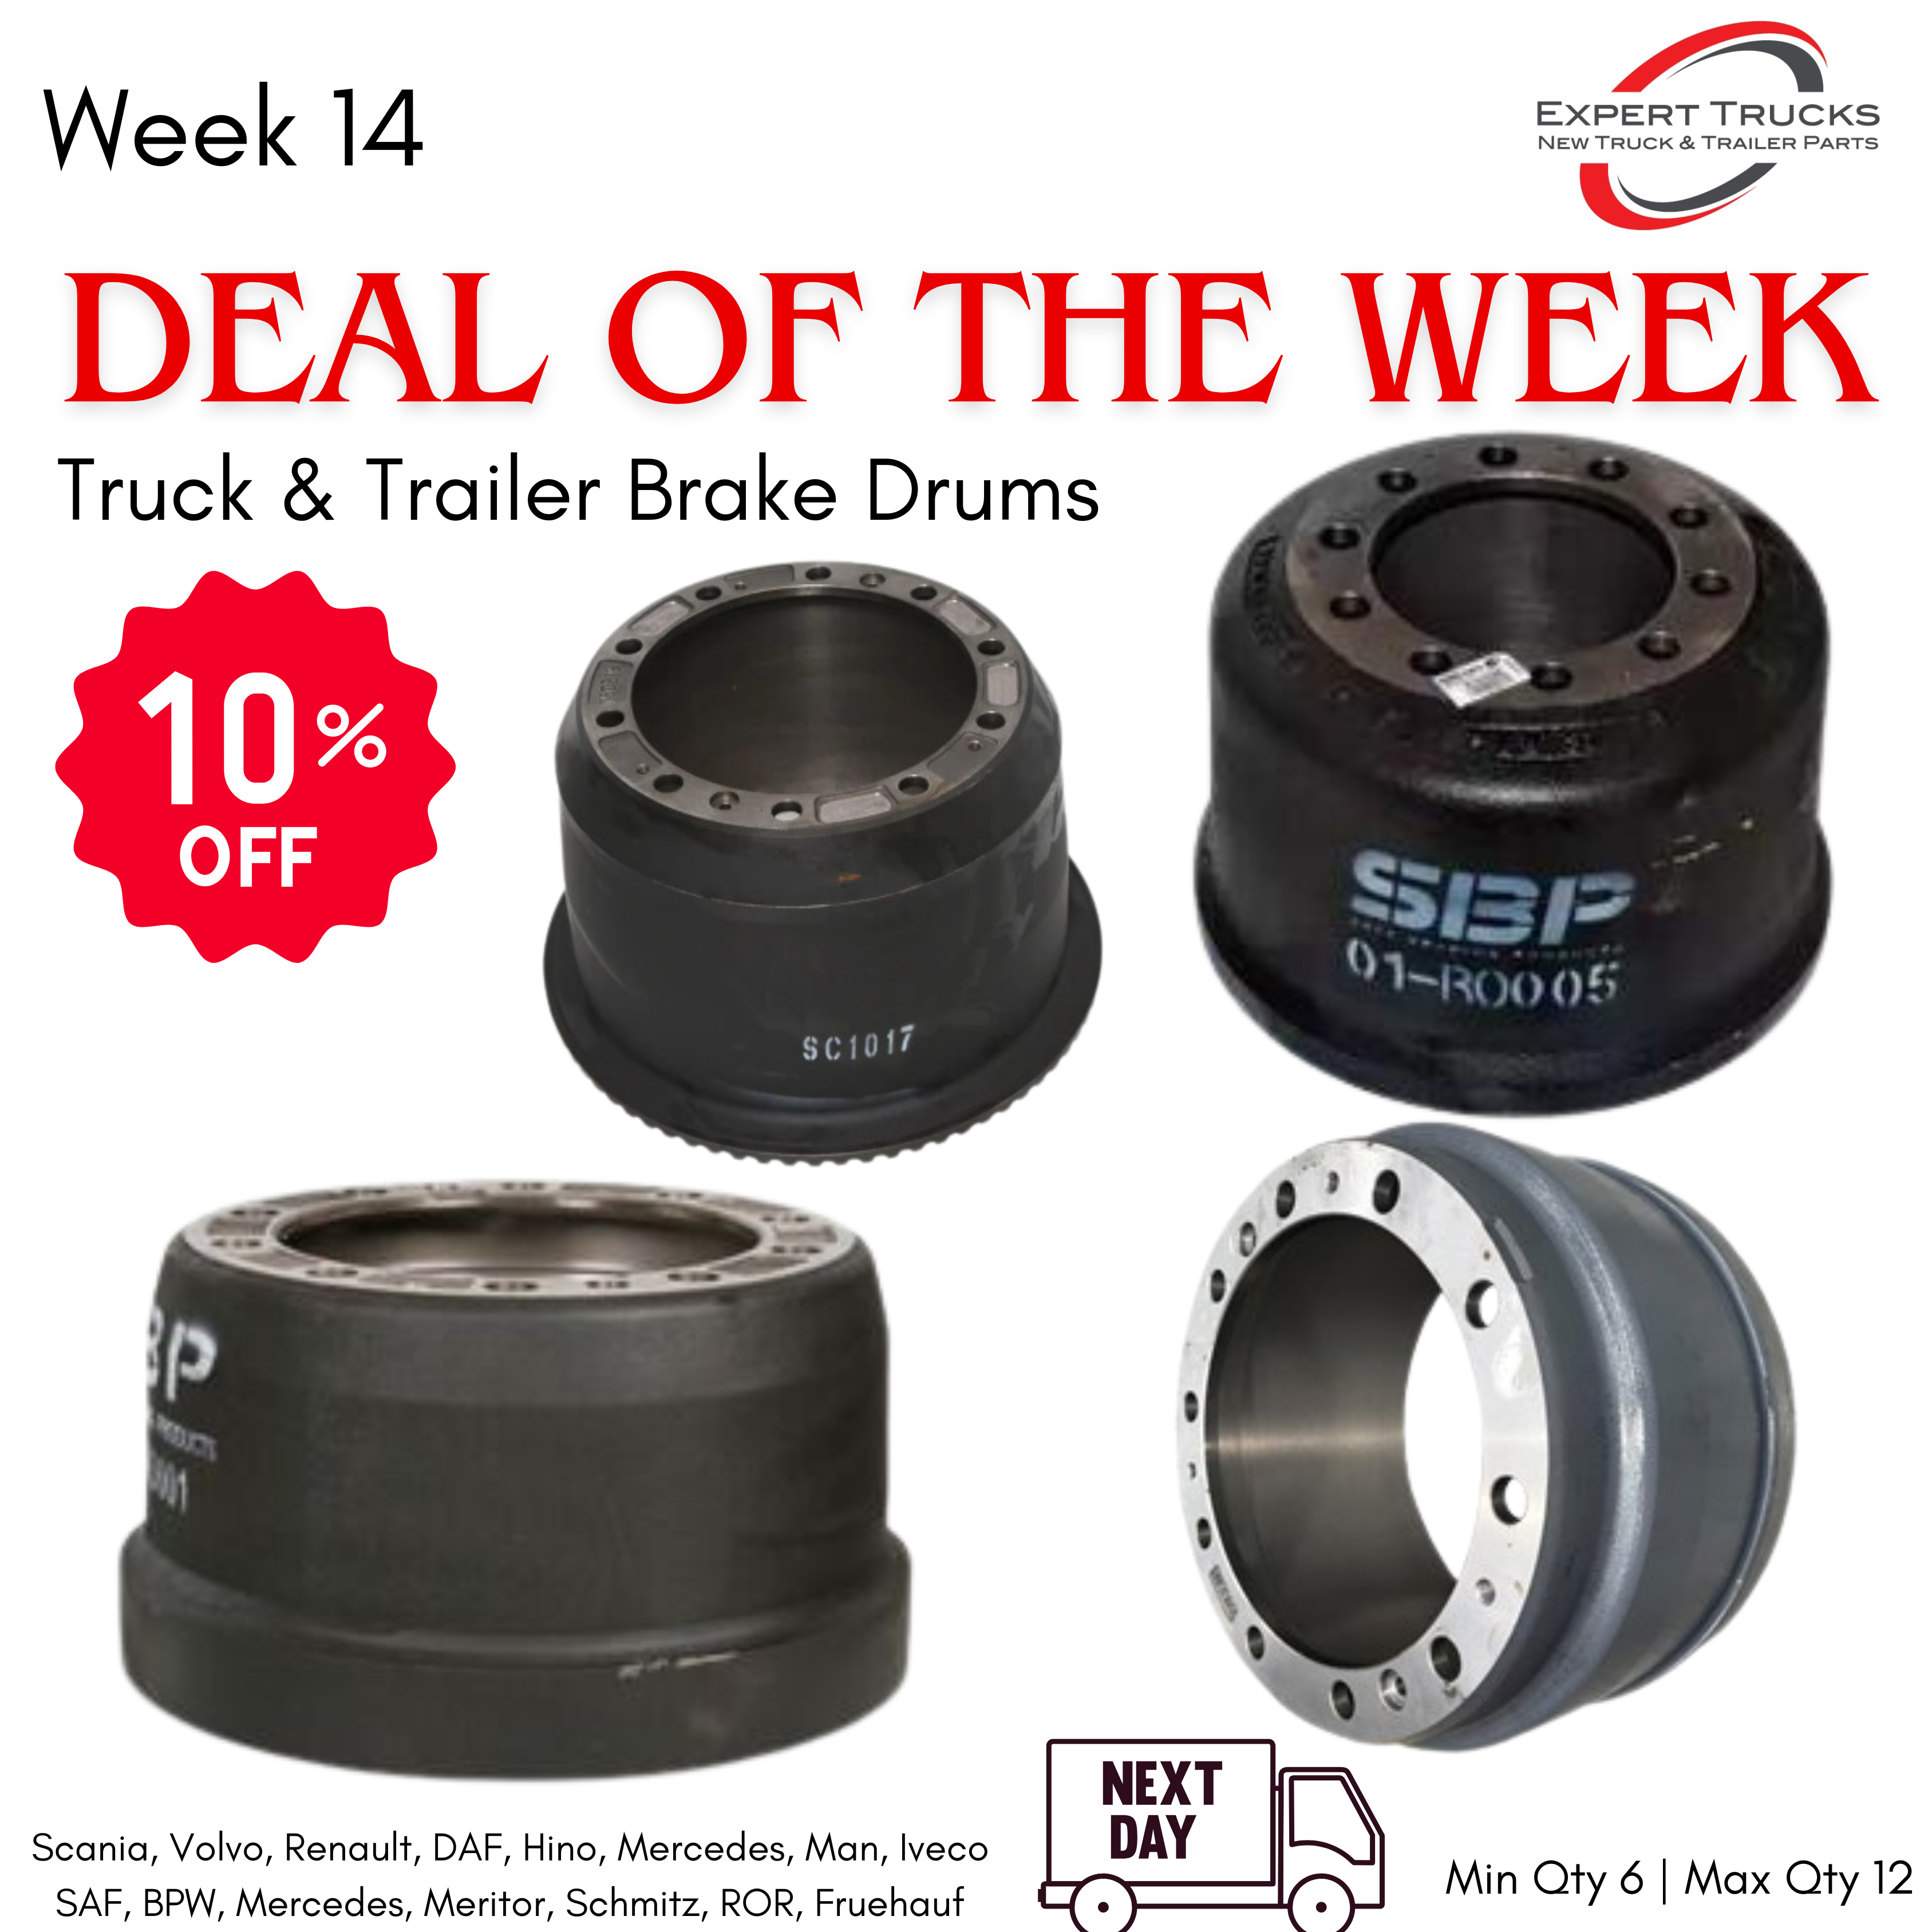 Deal of the Week - 14